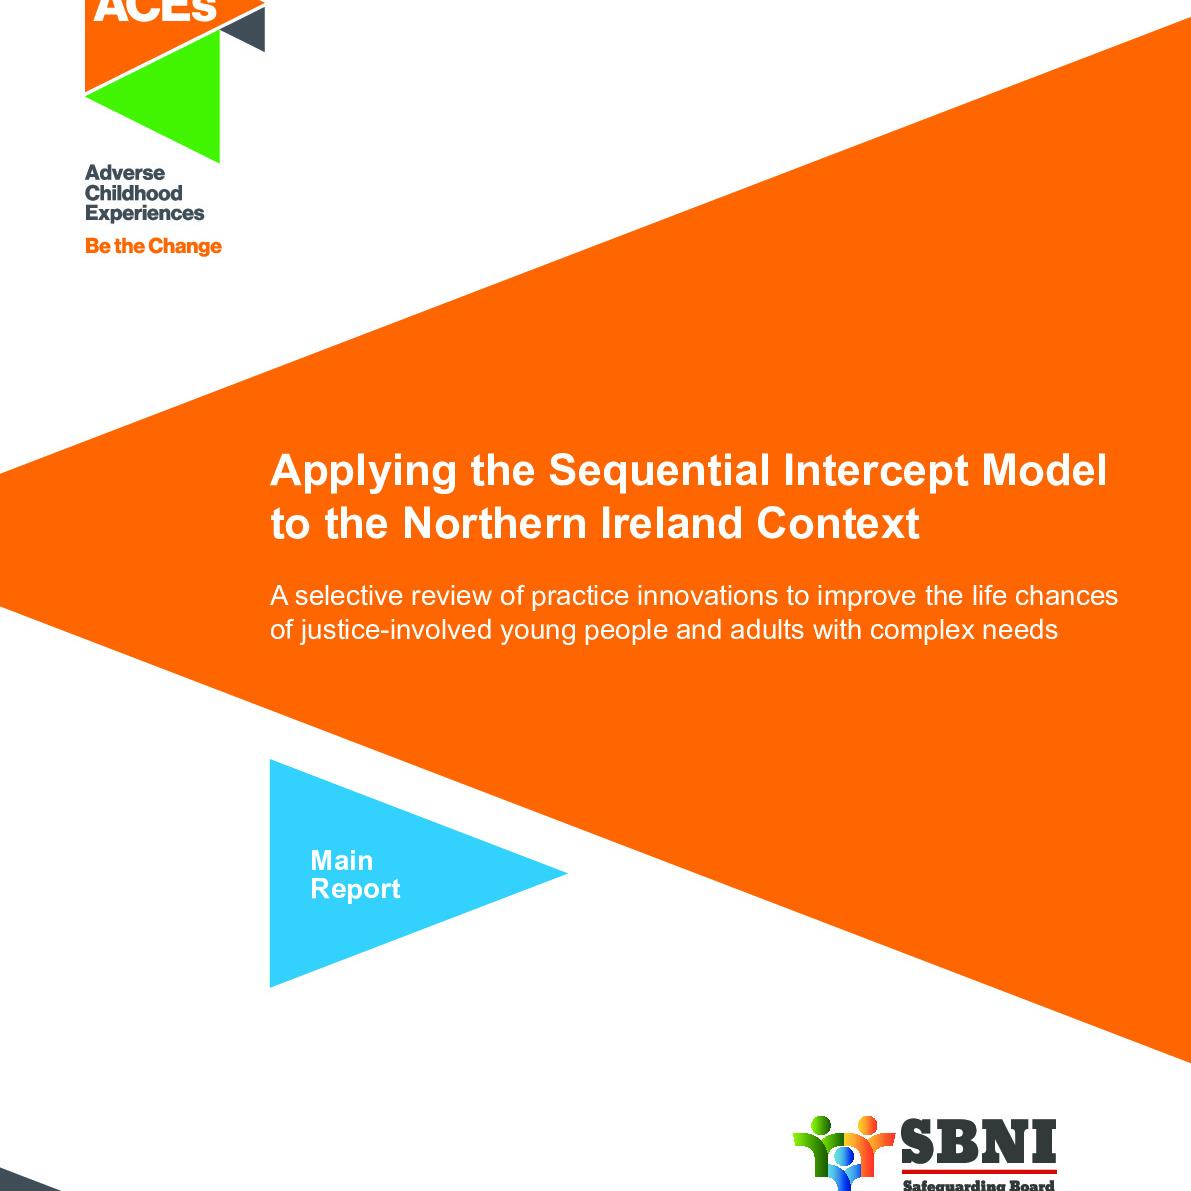 Applying the Sequential Intercept Model to the NI Context (Full Report)